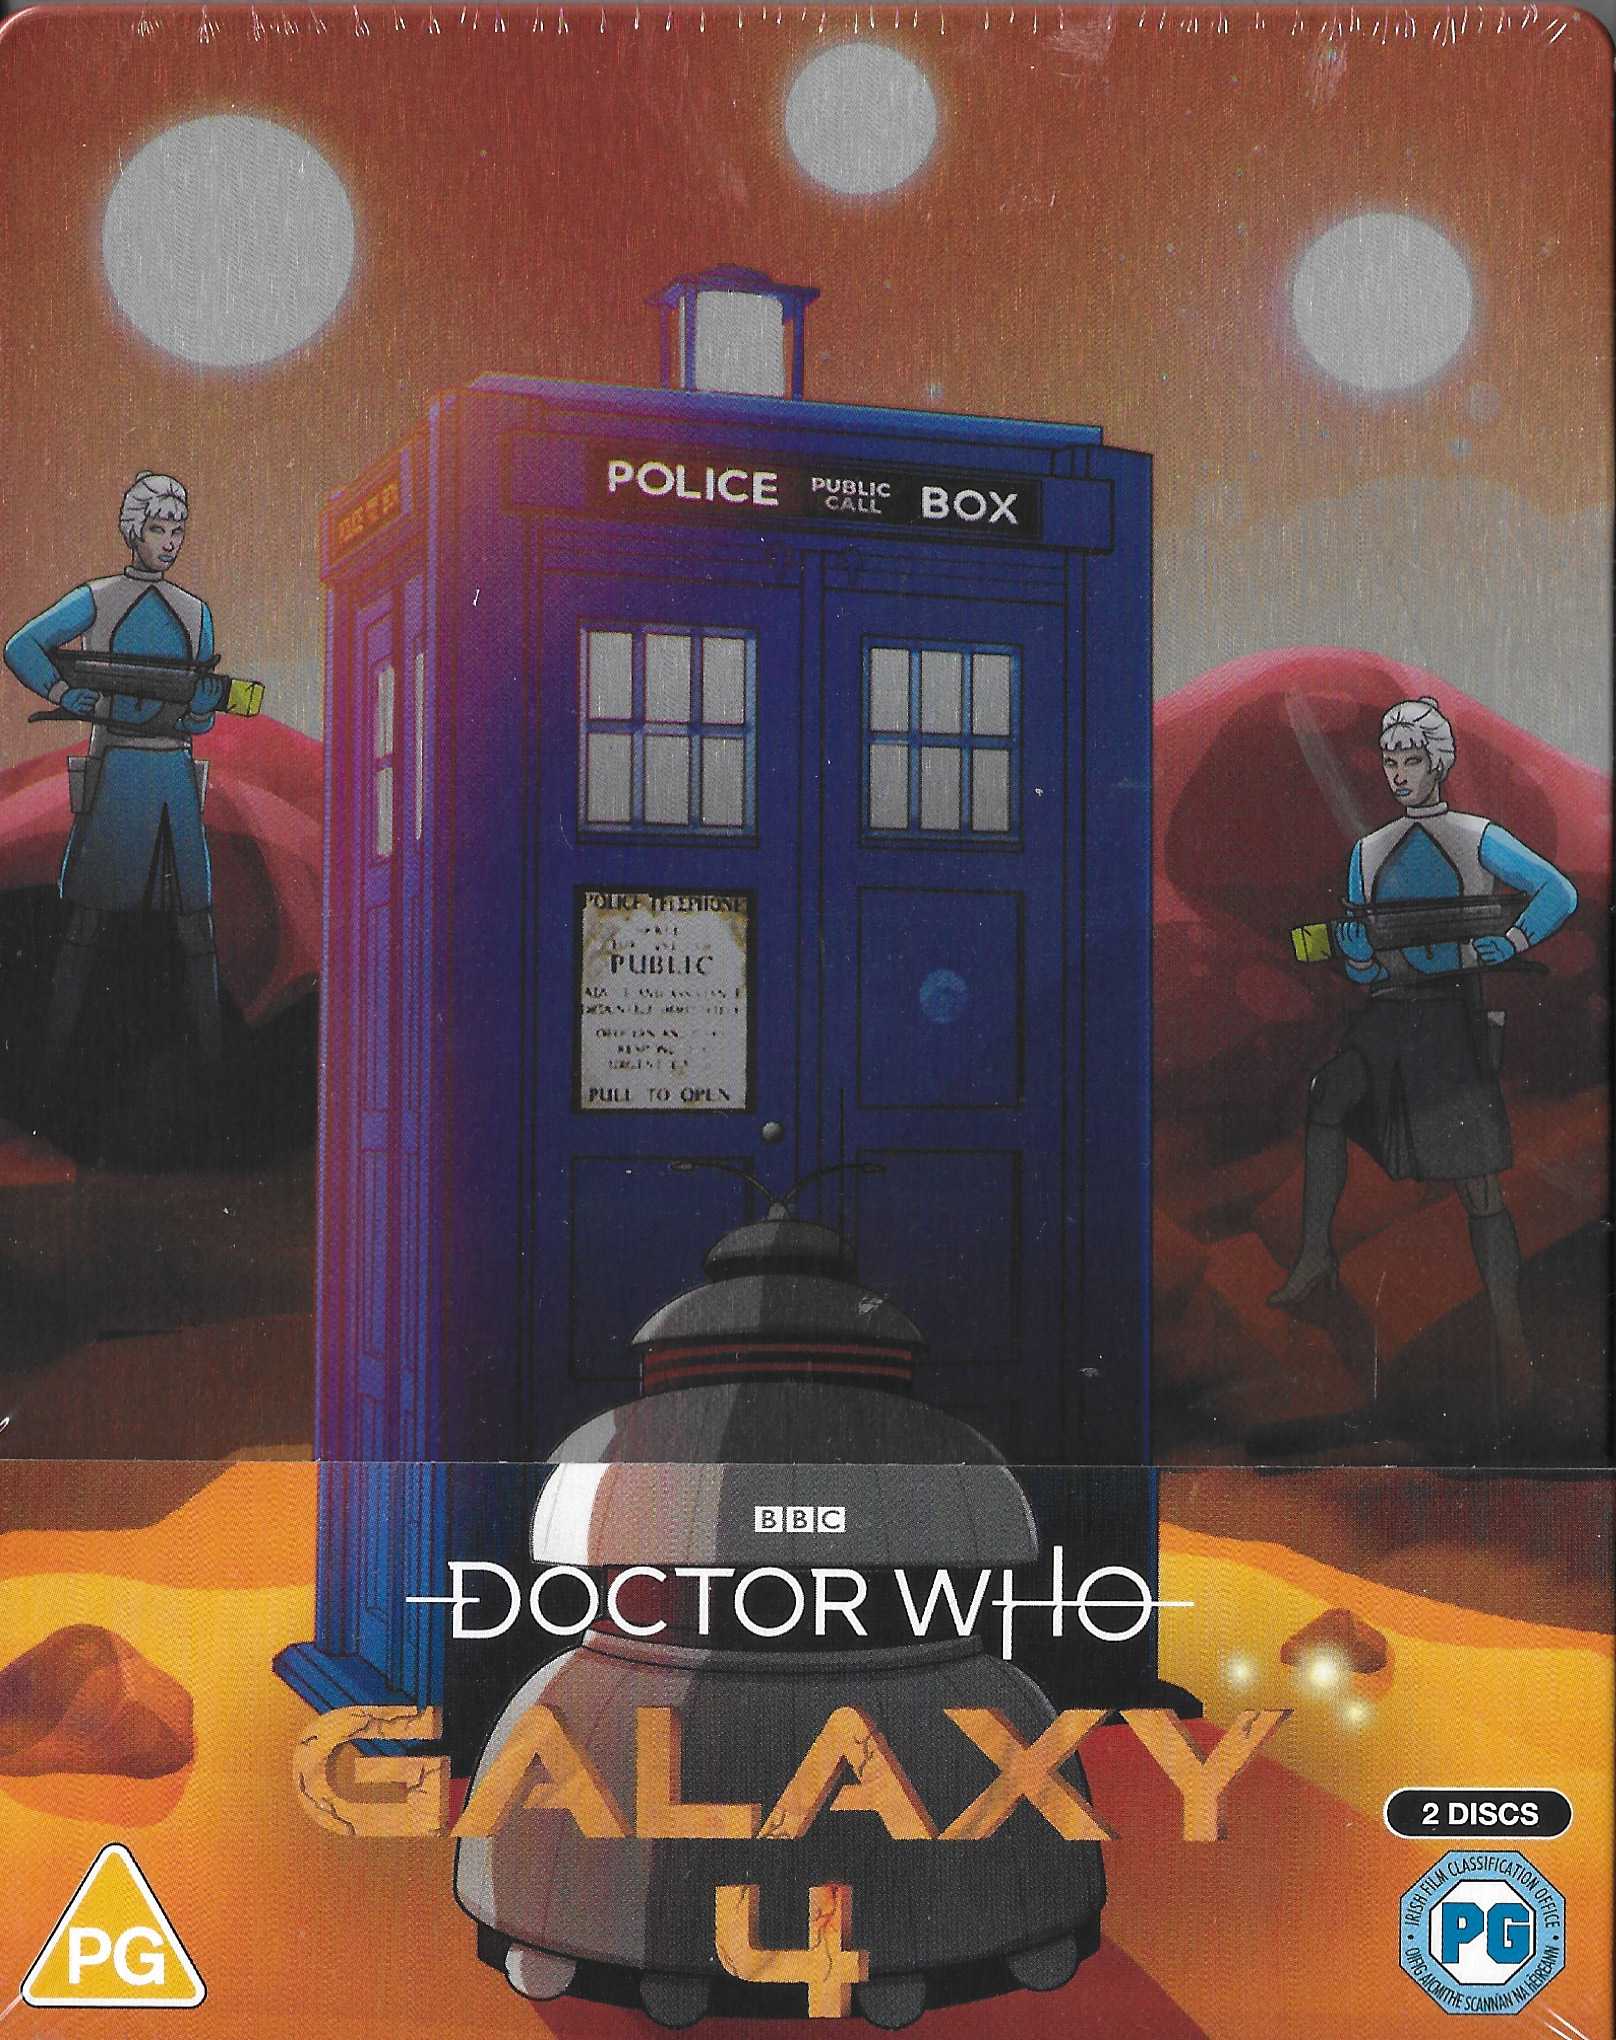 Picture of BBCBD 0524 Doctor Who - Galaxy 4 by artist William Emms from the BBC records and Tapes library